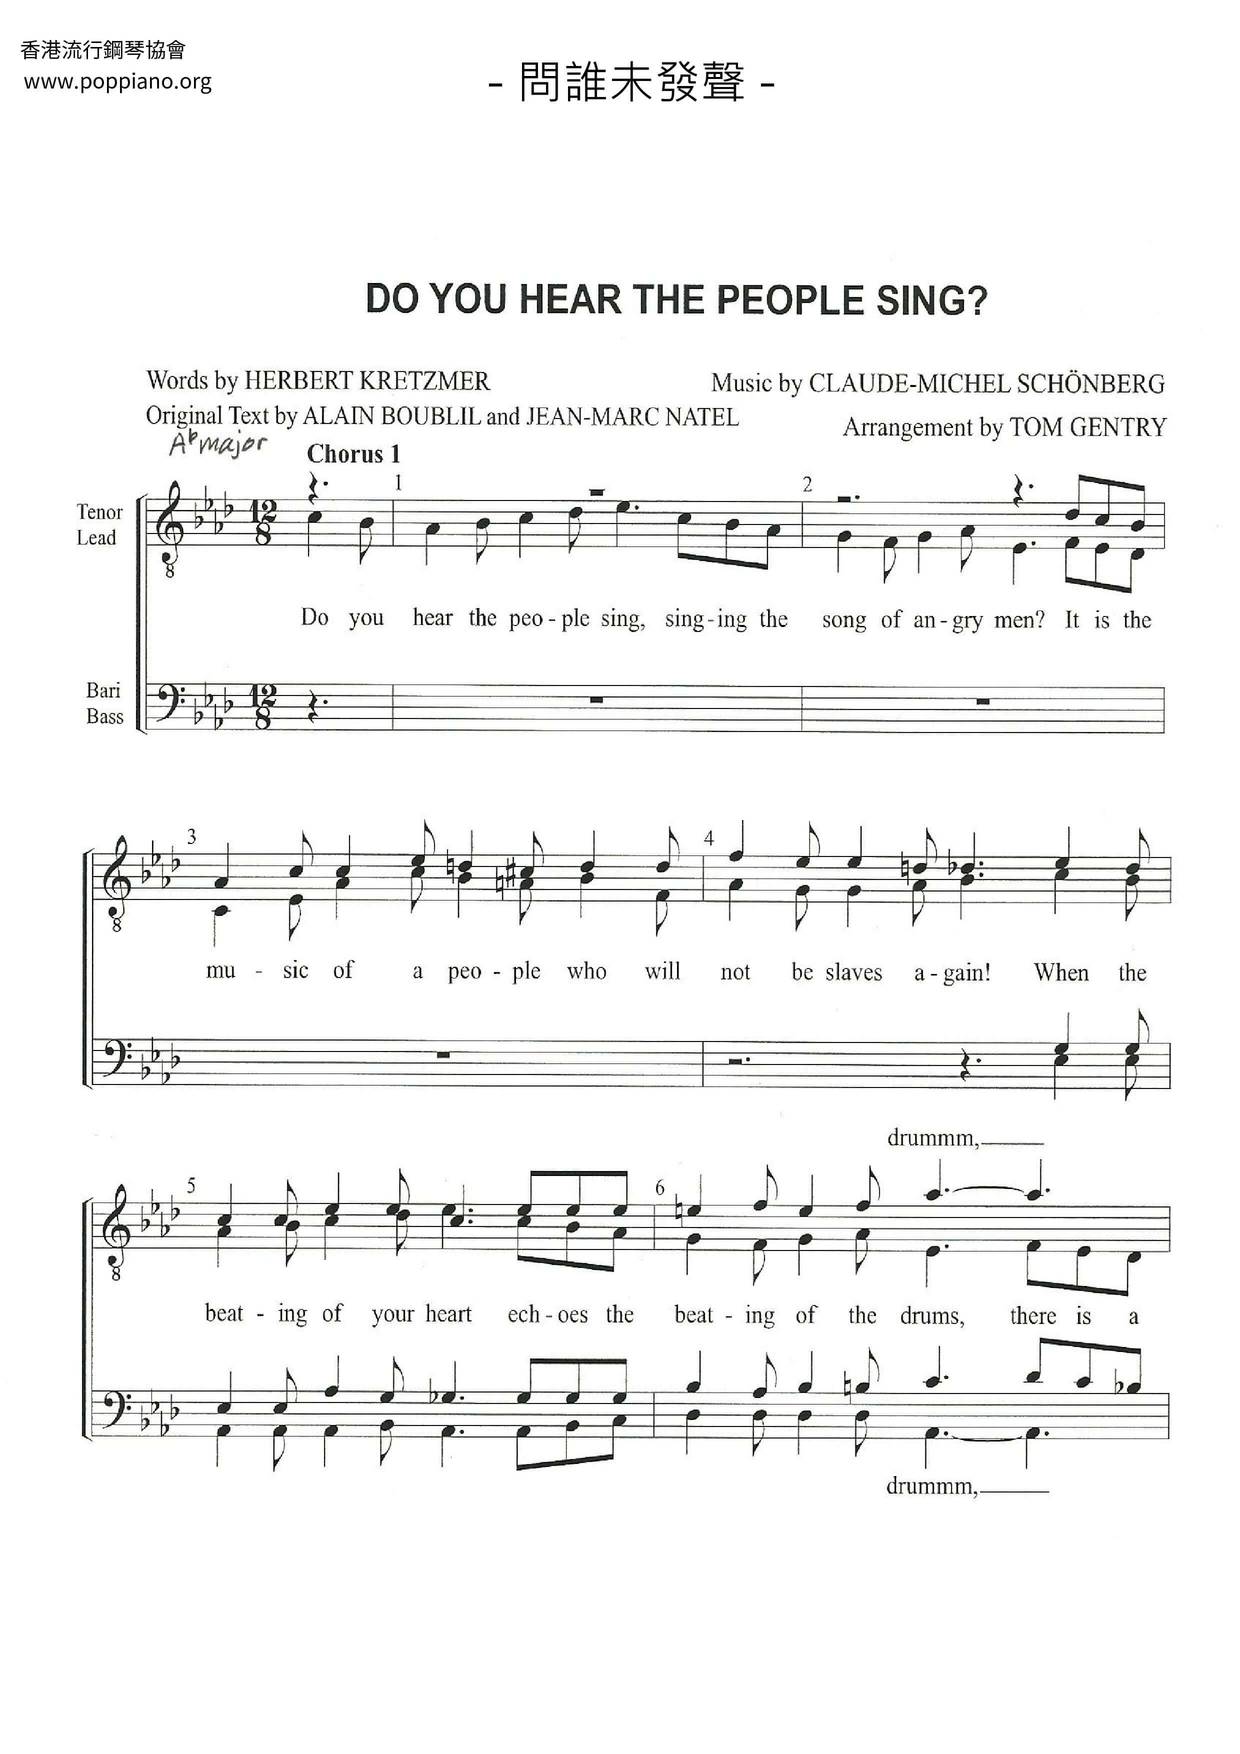 Les Miserables Do You Hear The People Sing Sheet Music Pdf レ ミゼラブル Free Score Download